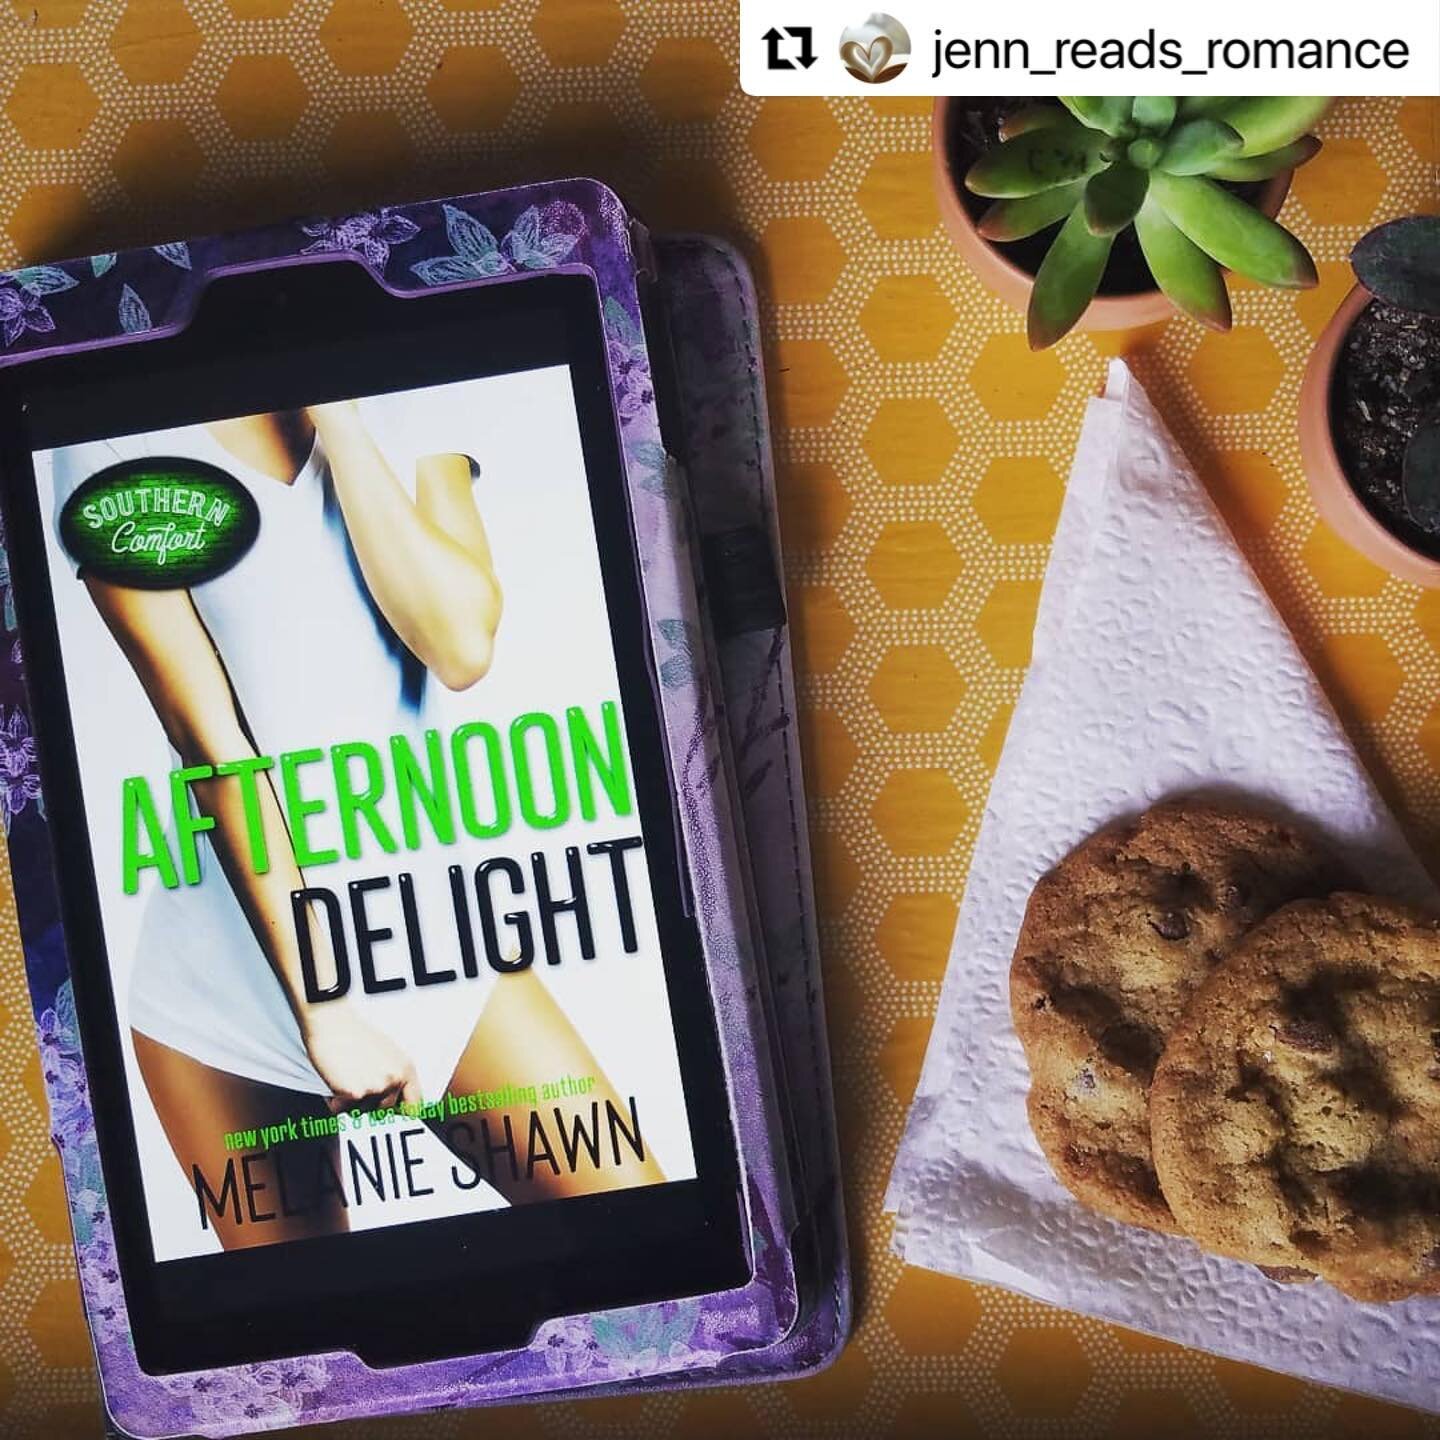 Thank you, Jenn! We&rsquo;re kinda bummed to leave Firefly Island, too. Also, best believe that the phrase &ldquo;hilarious and insanely hot&rdquo; is going to be making its way into teaser graphics!!! 🤣 LOVE IT!!! ❤️❤️❤️

#Repost @jenn_reads_romanc